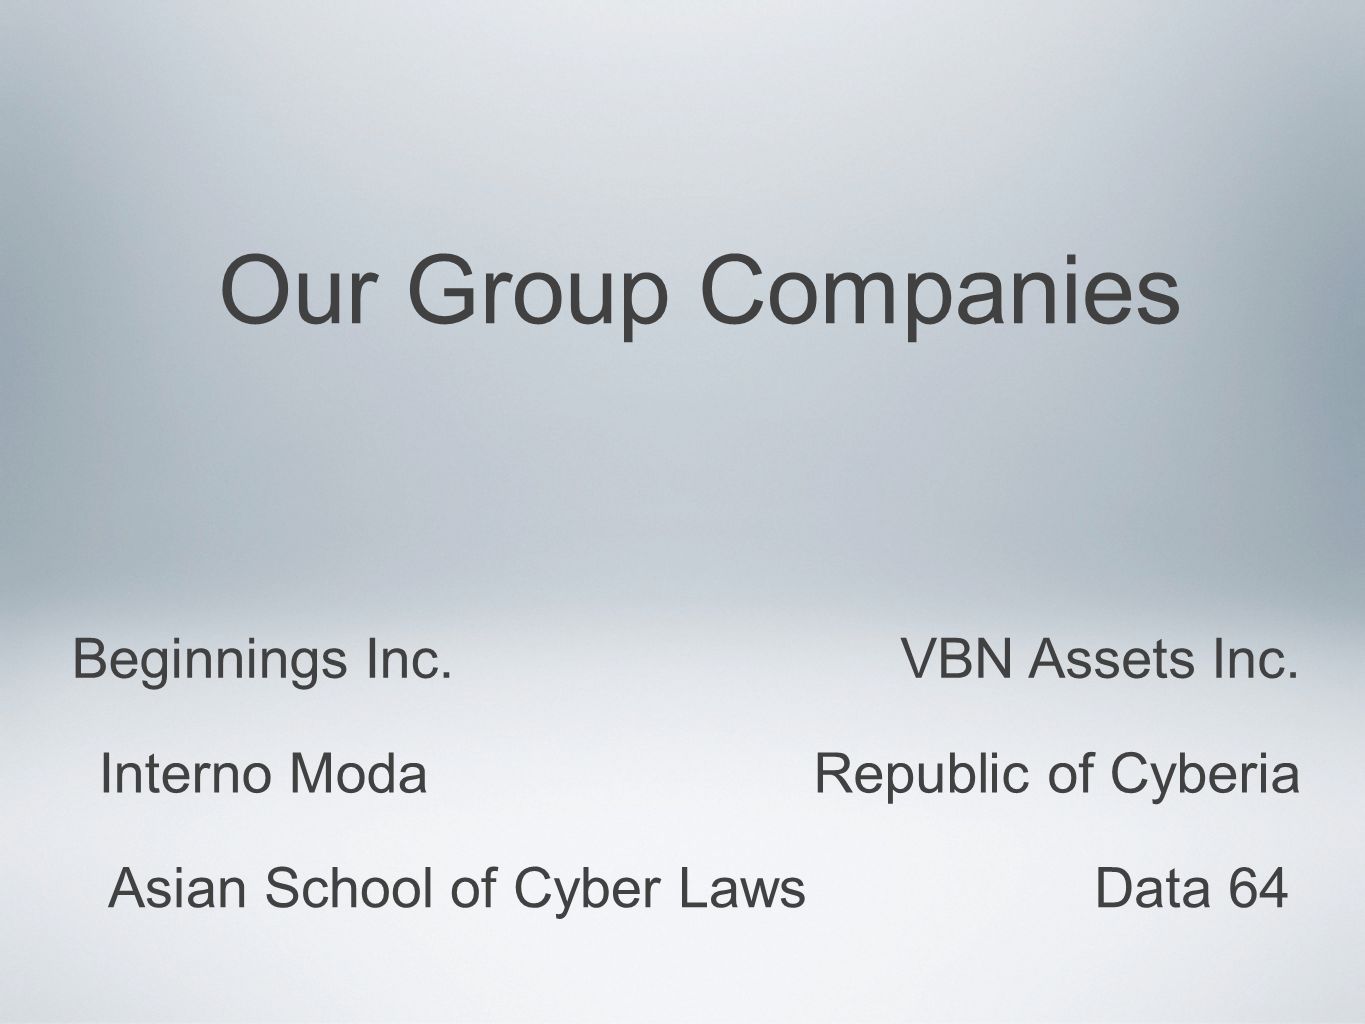 Our Group Companies Beginnings Inc.